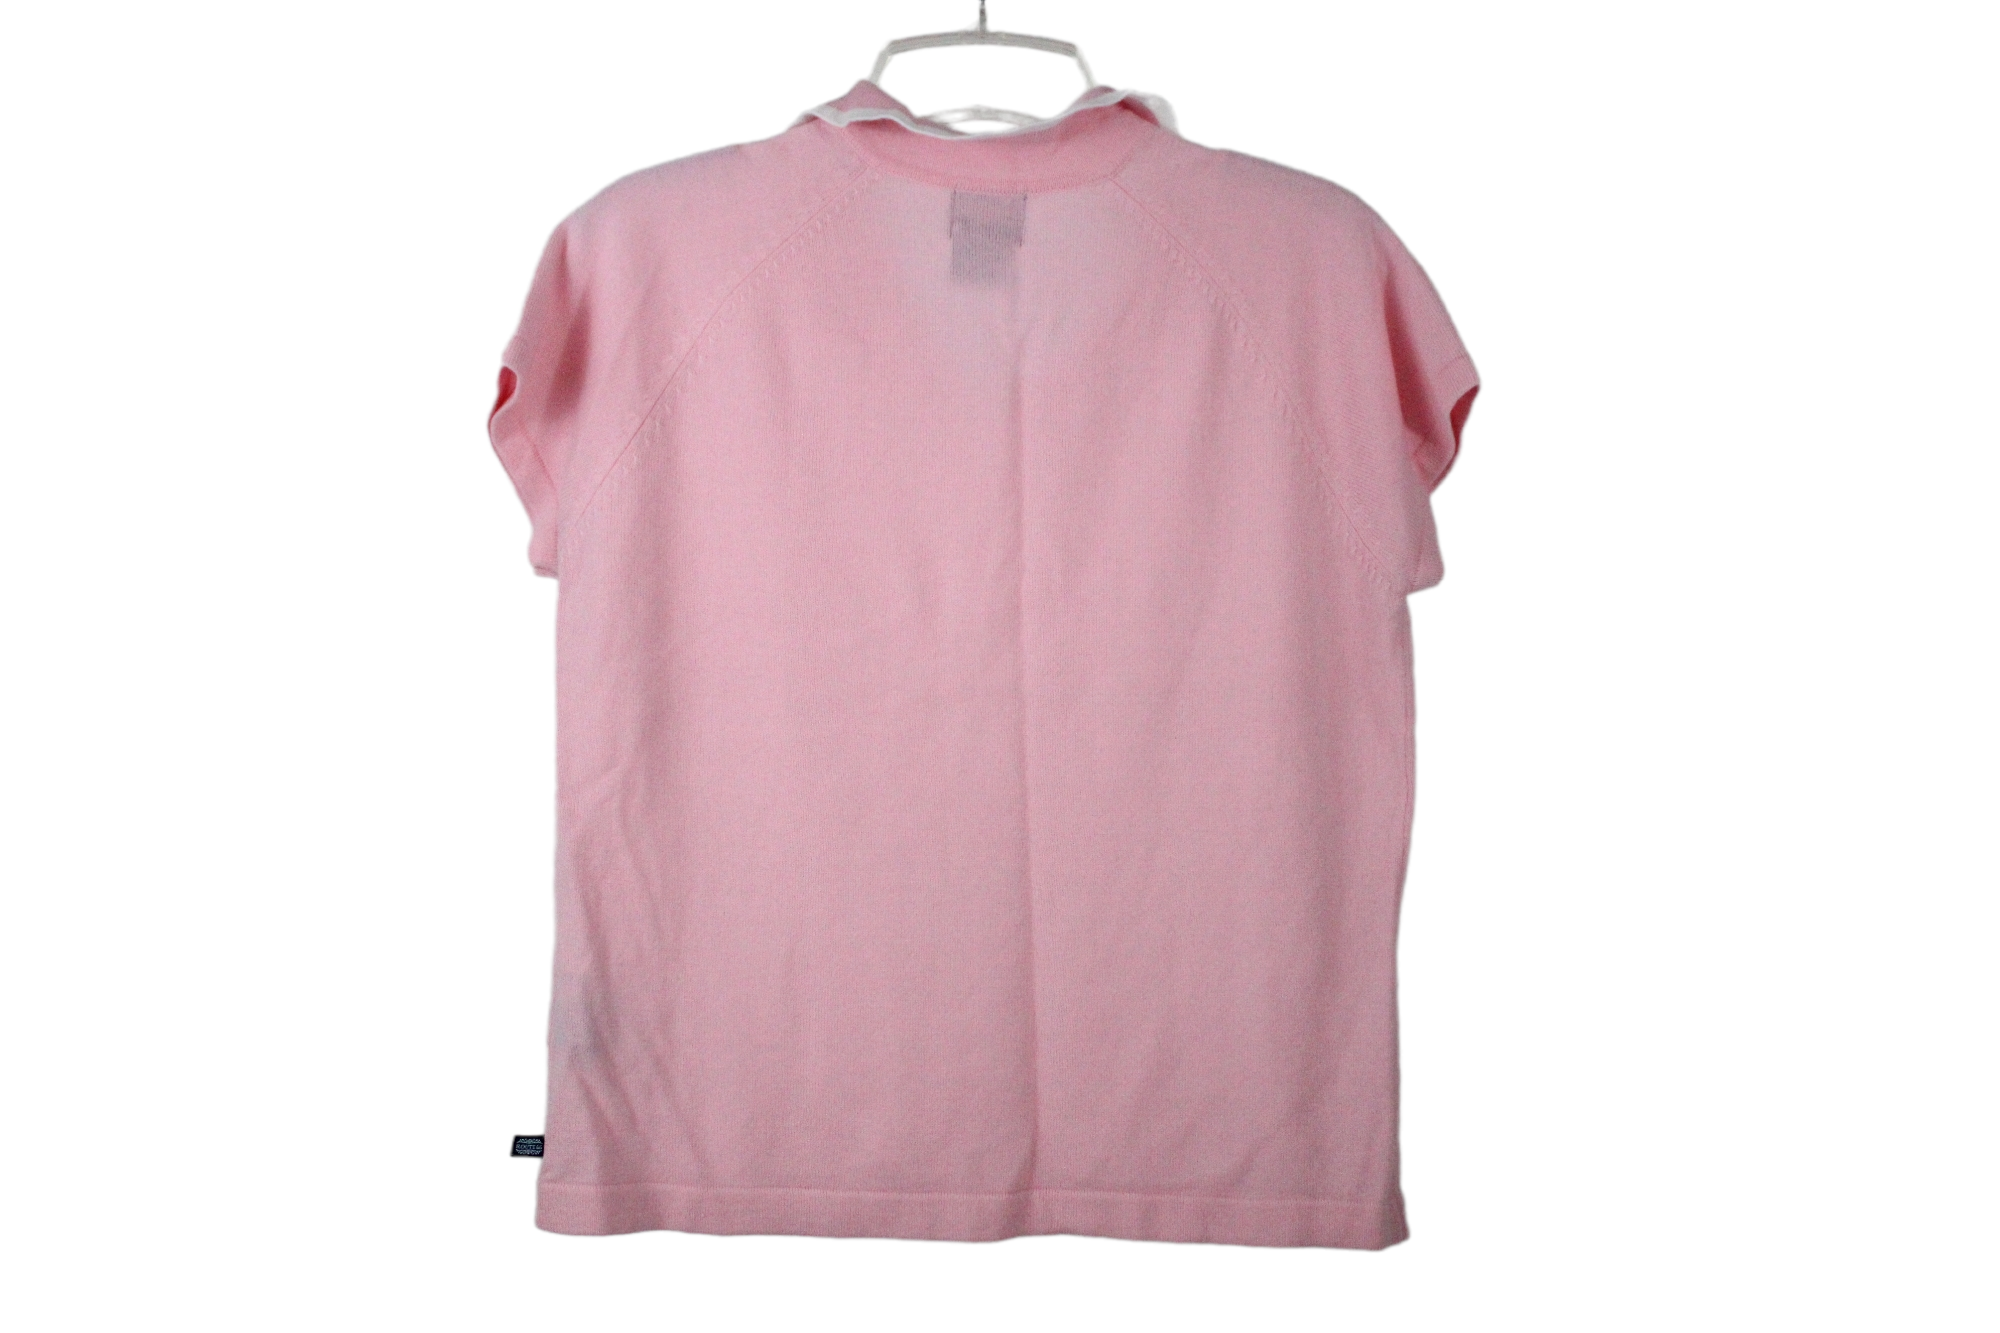 Route 66 Pink Knit Top | M